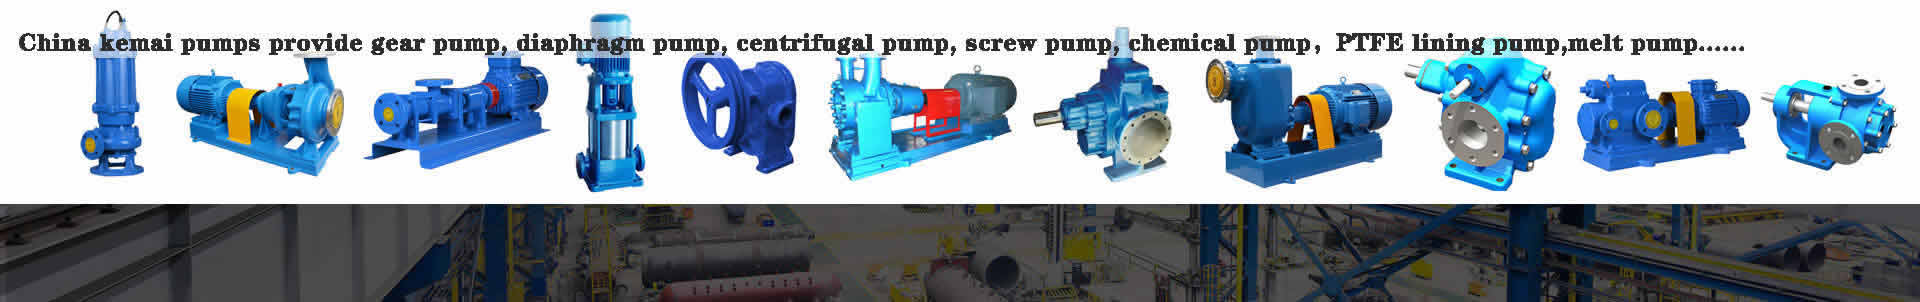 China Pump Manufacturers Suppliers